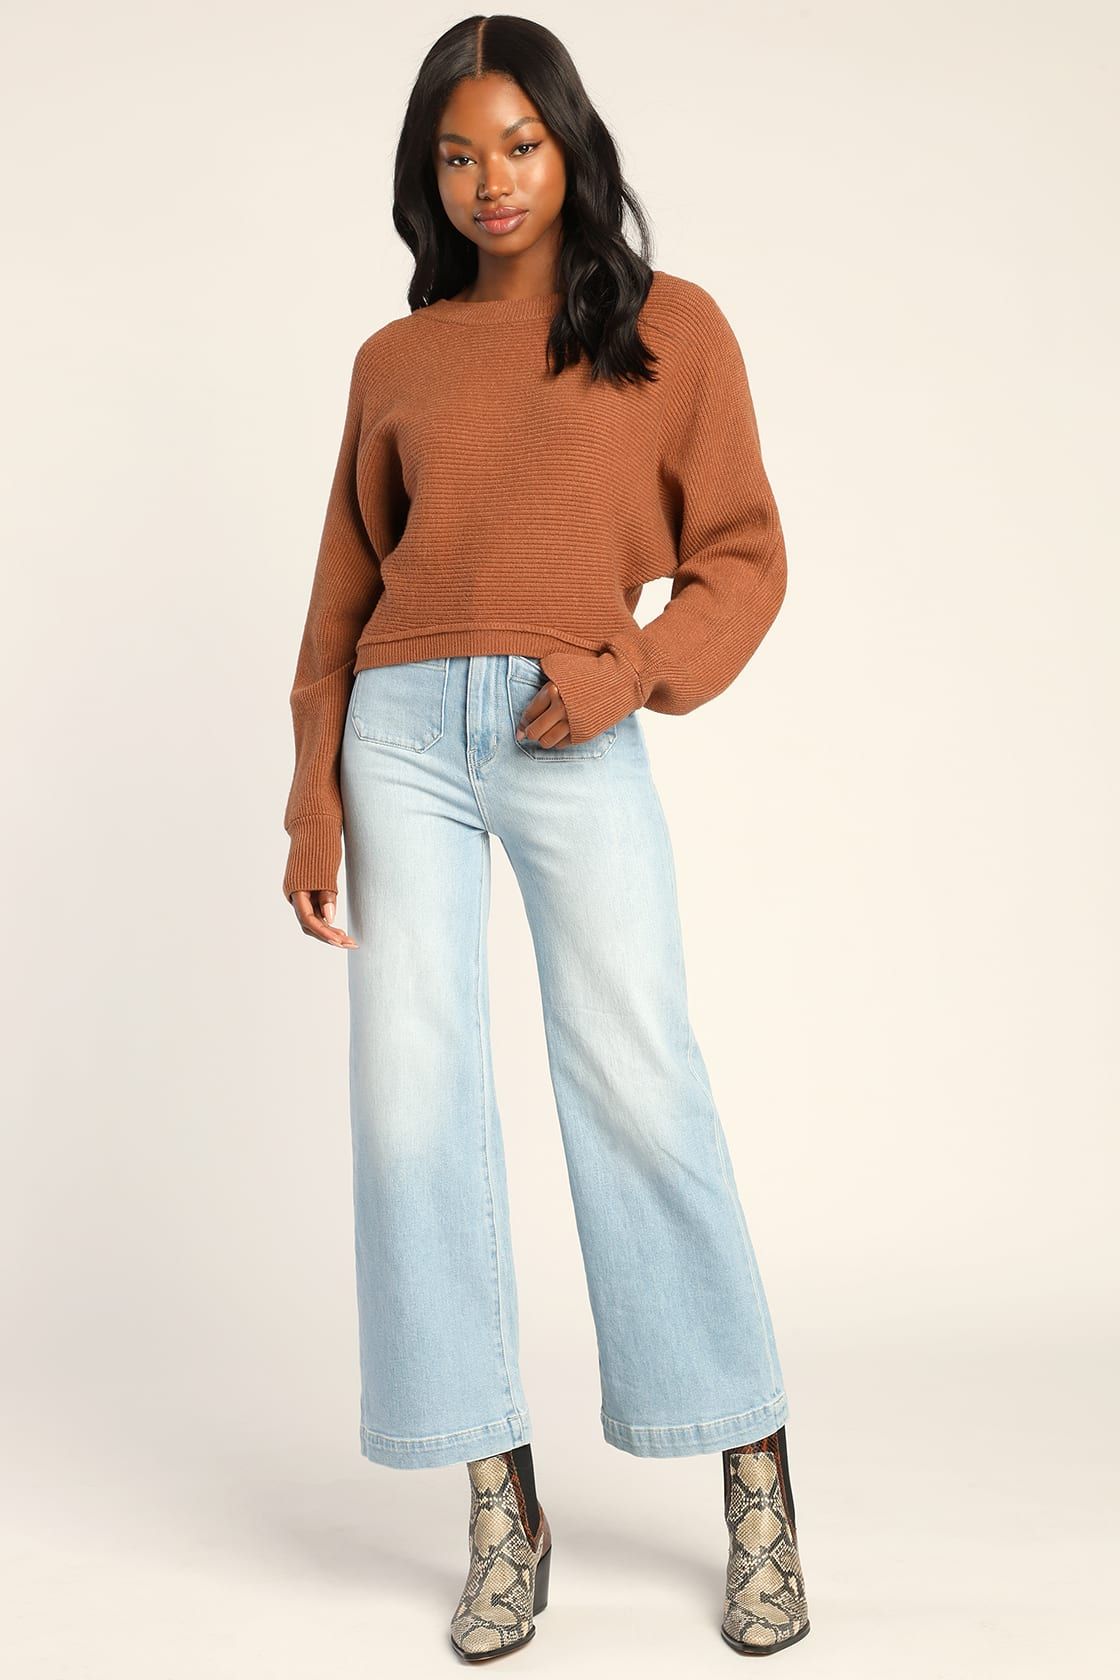 Fireside Flirt Rust Brown Ribbed Cropped Pullover Sweater | Lulus (US)